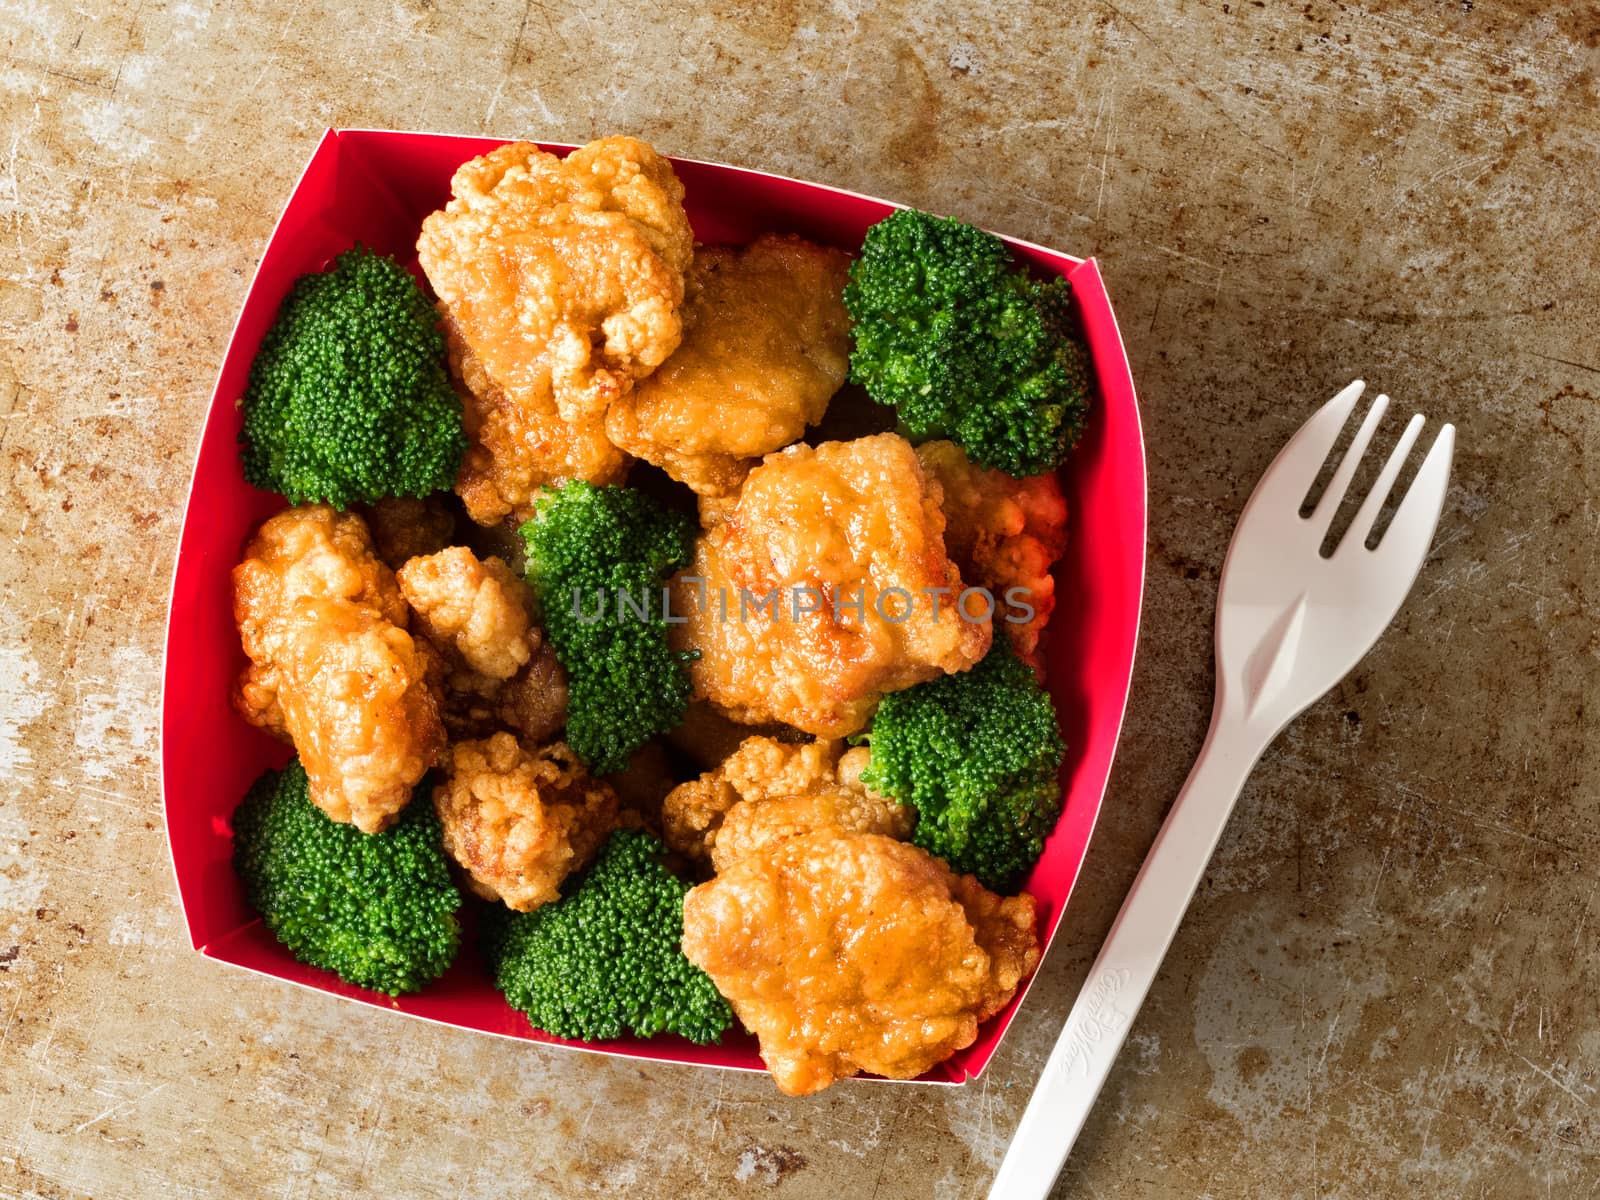 american chinese takeout general tso chicken by zkruger